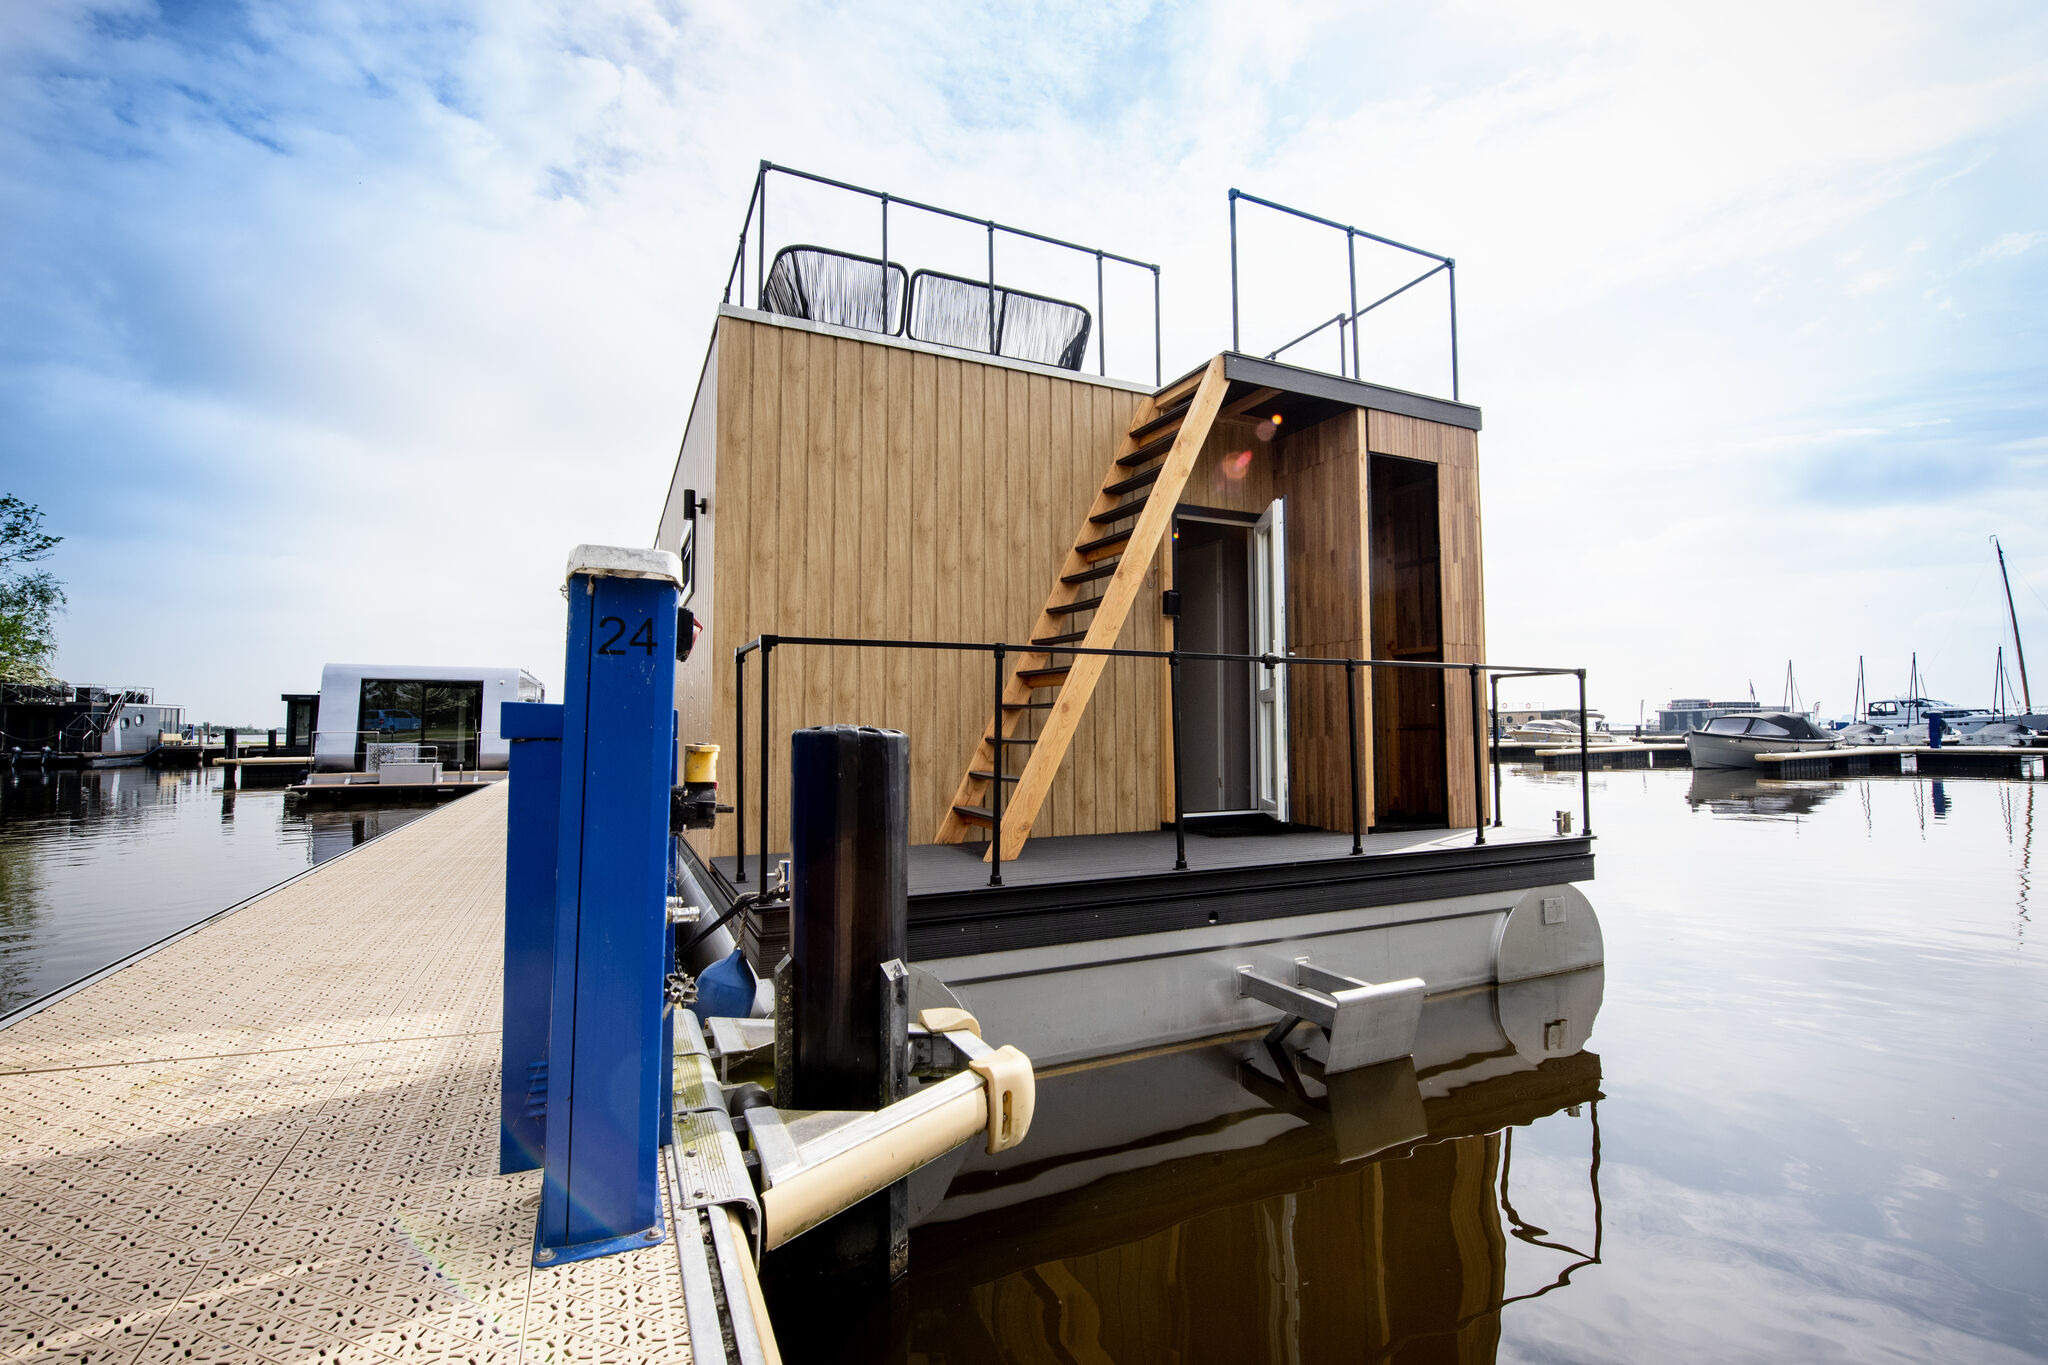 Modern houseboat with view of the Lake